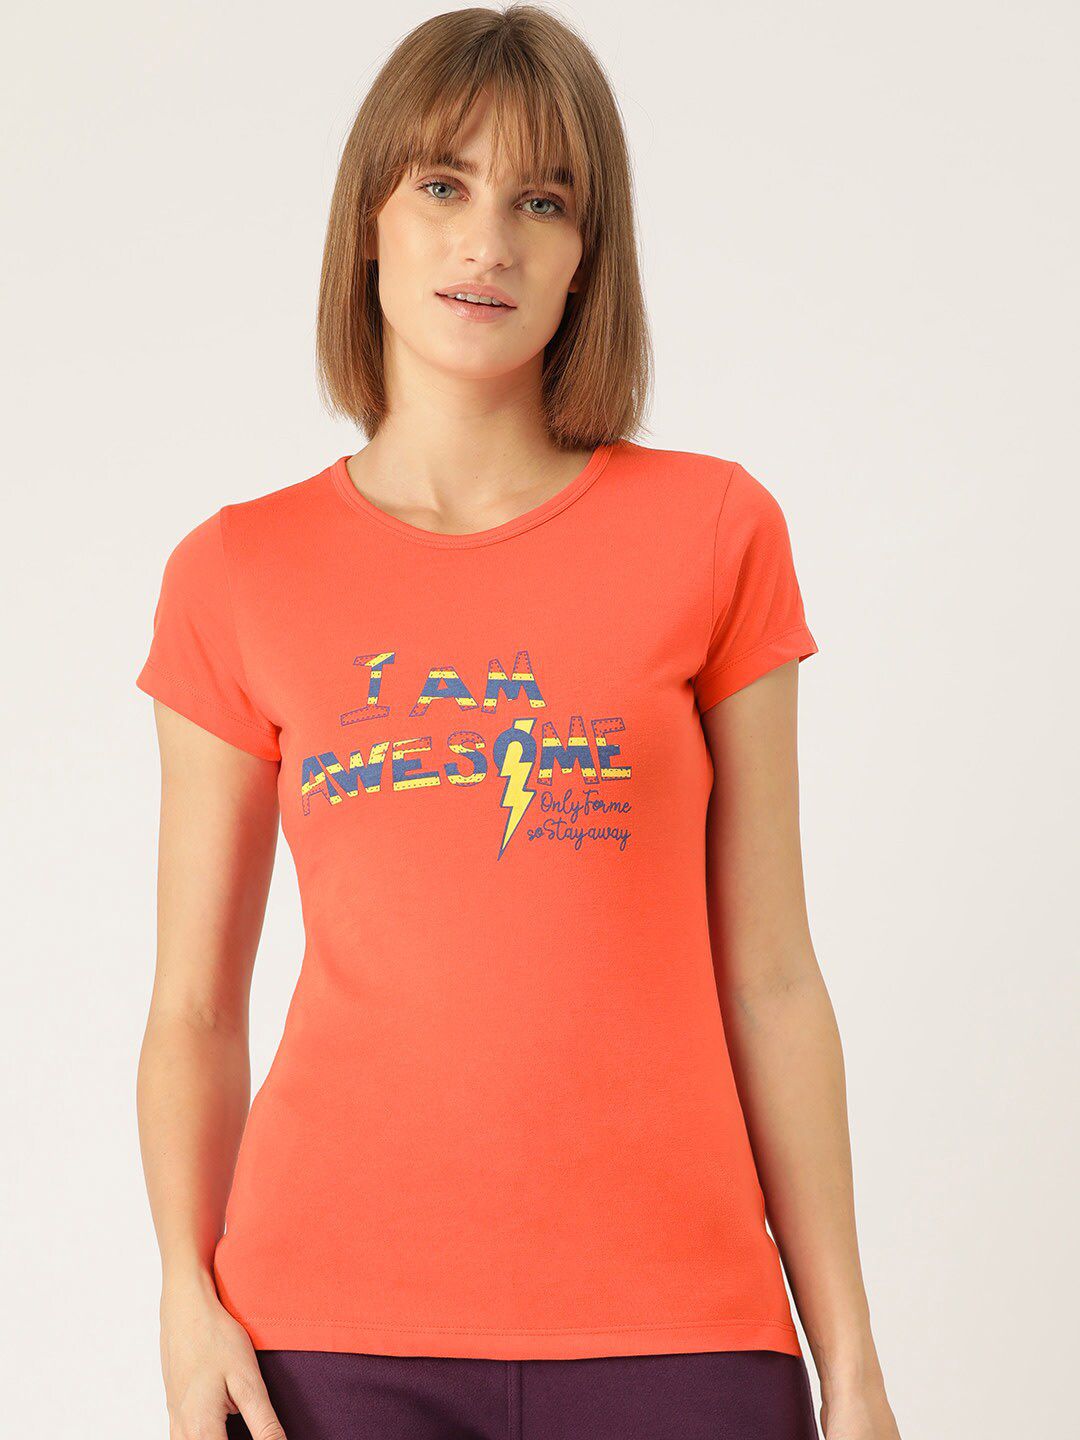 Sweet Dreams Women Coral Orange Printed Cotton Lounge T-shirts F-LLT-510A CORAL Price in India